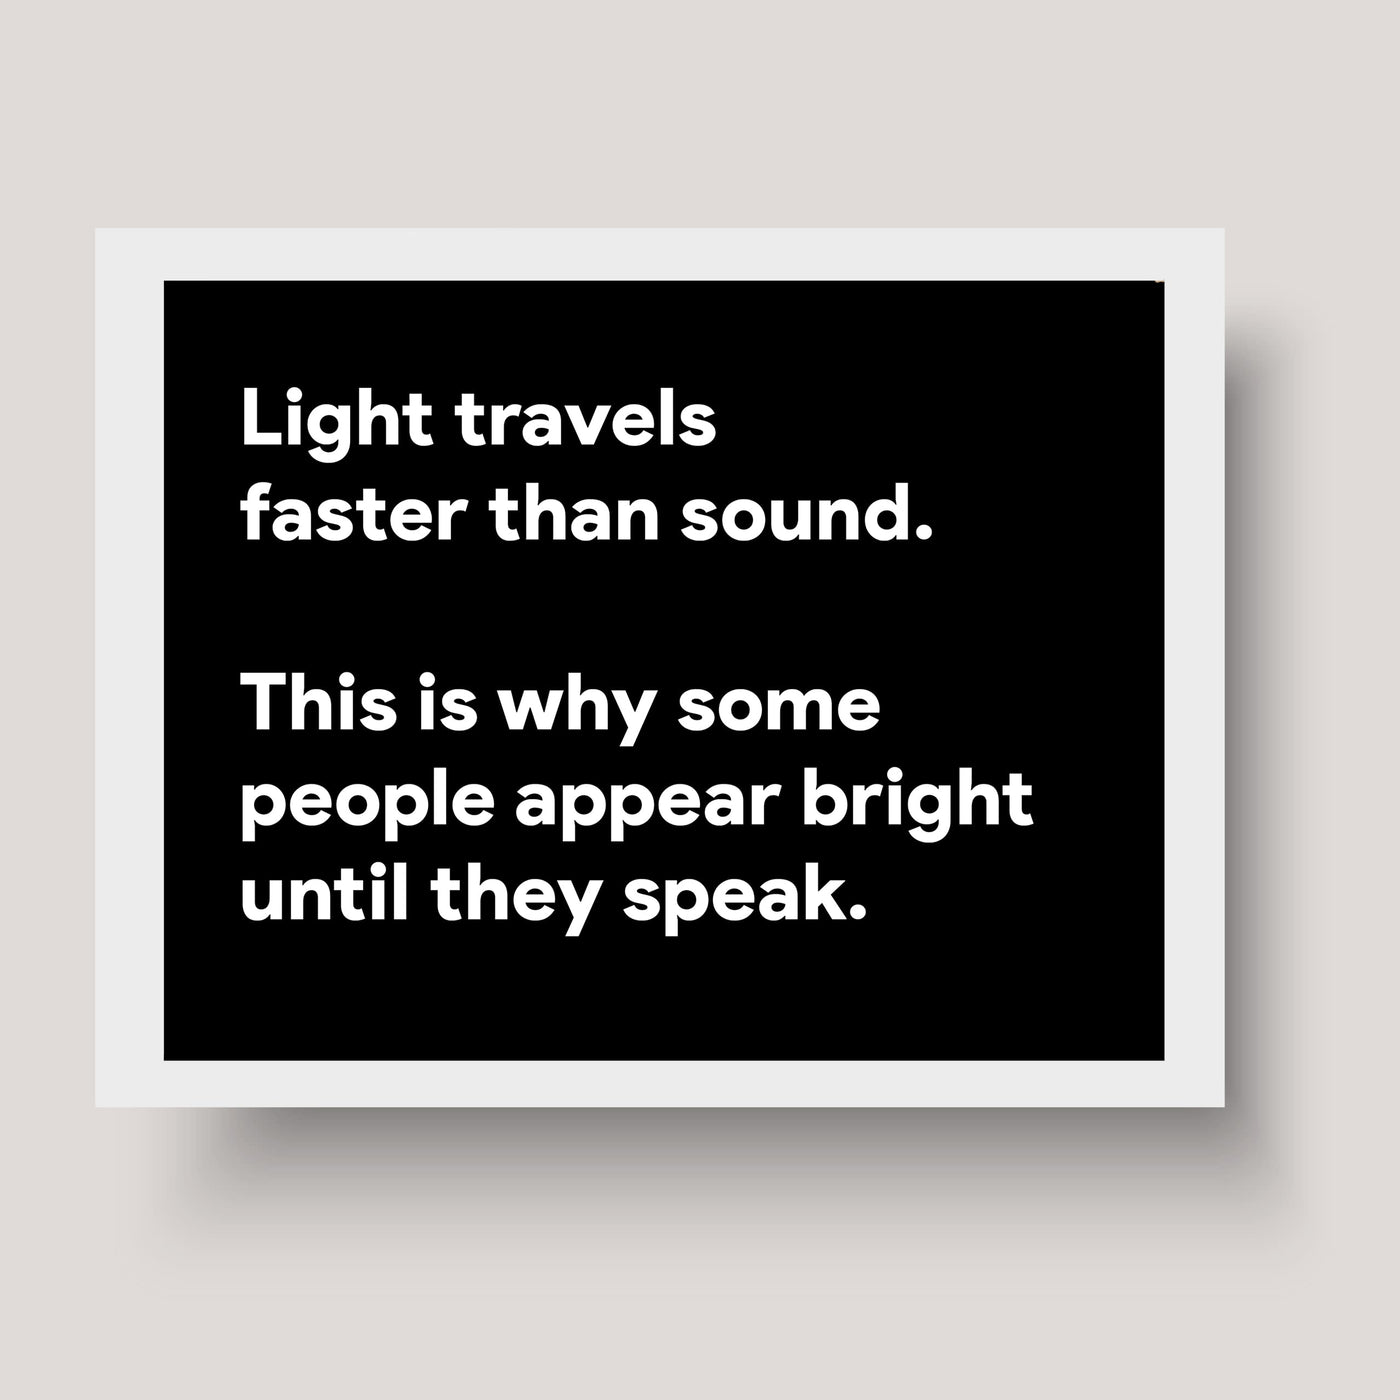 Light Travels Faster Than Sound Funny Wall Decor Sign -10 x 8" Black & White Sarcastic Art Print -Ready to Frame. Humorous Decoration for Home-Office-Bar-Shop-Man Cave Decor. Fun Novelty Gift!